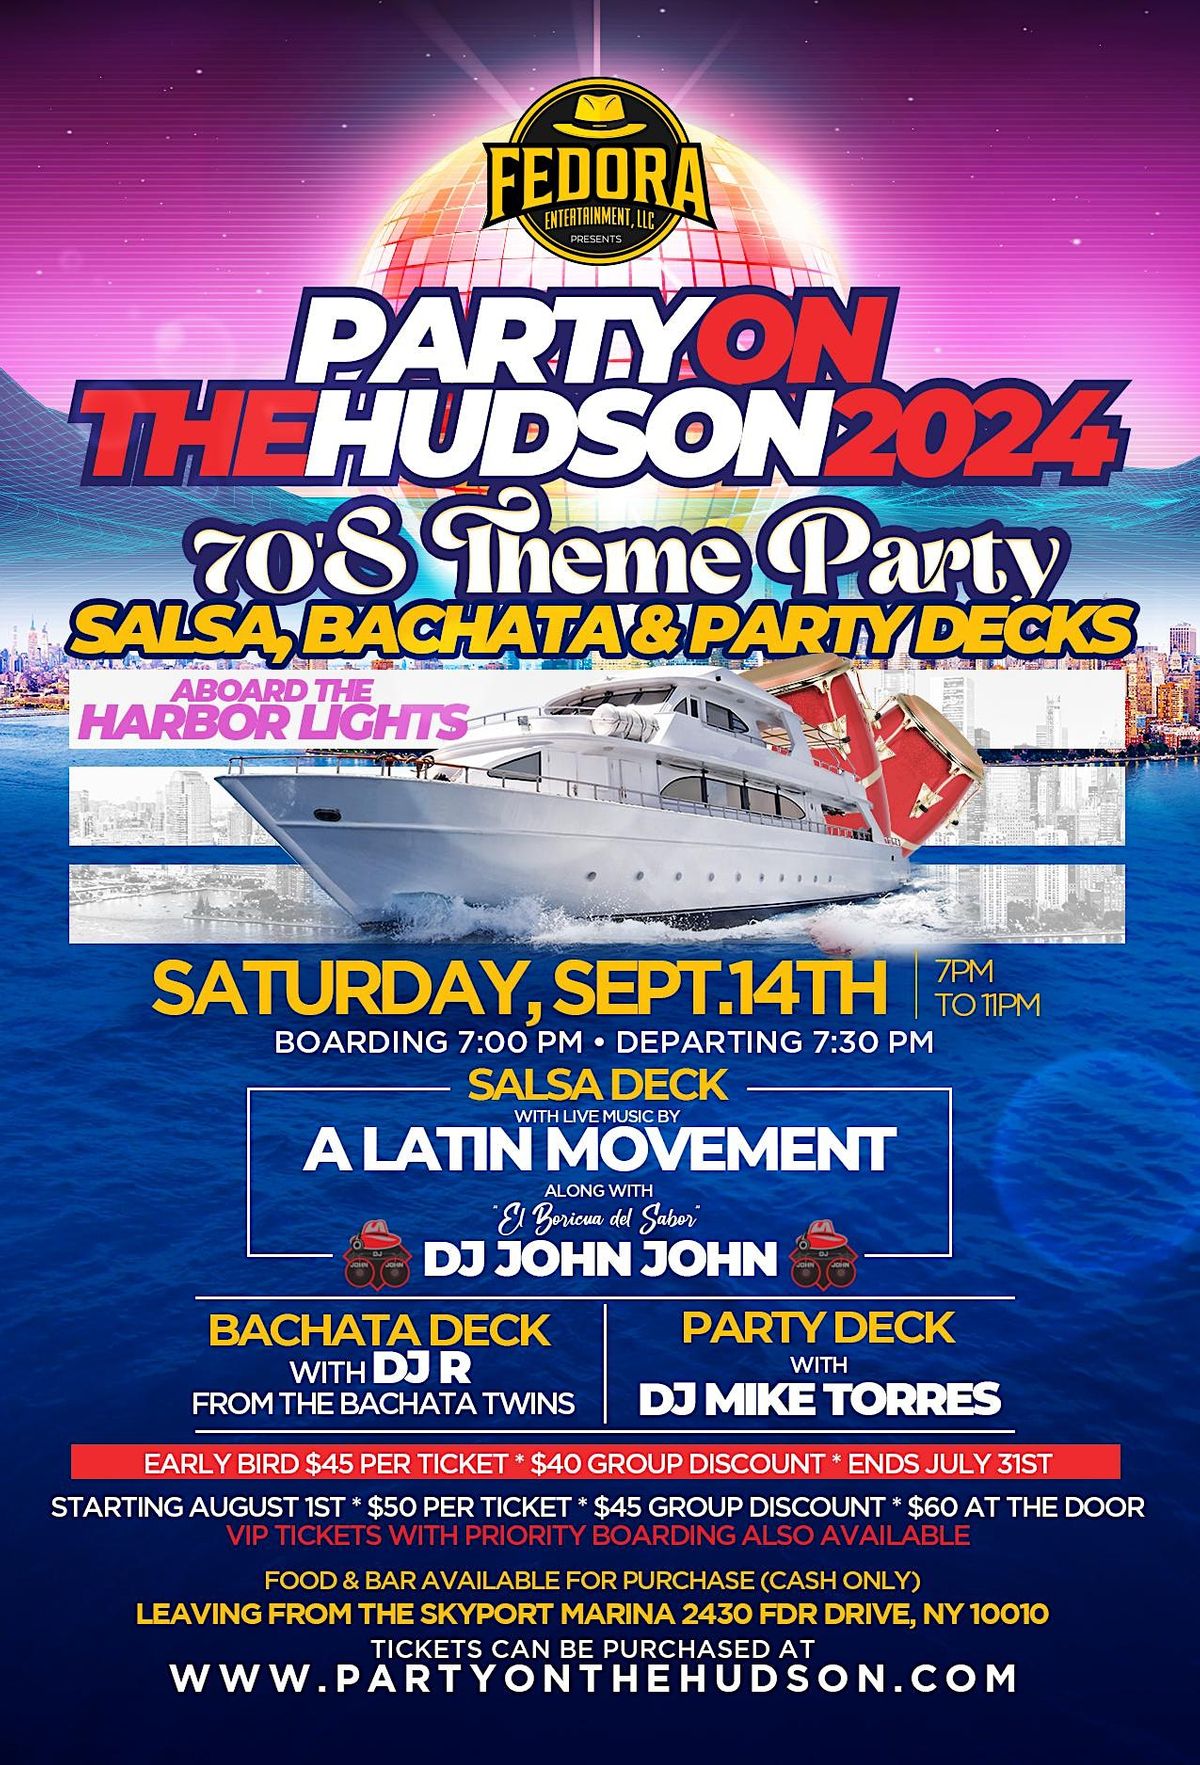 Party On The Hudson 70'S THEME PARTY with 3 Decks of Music